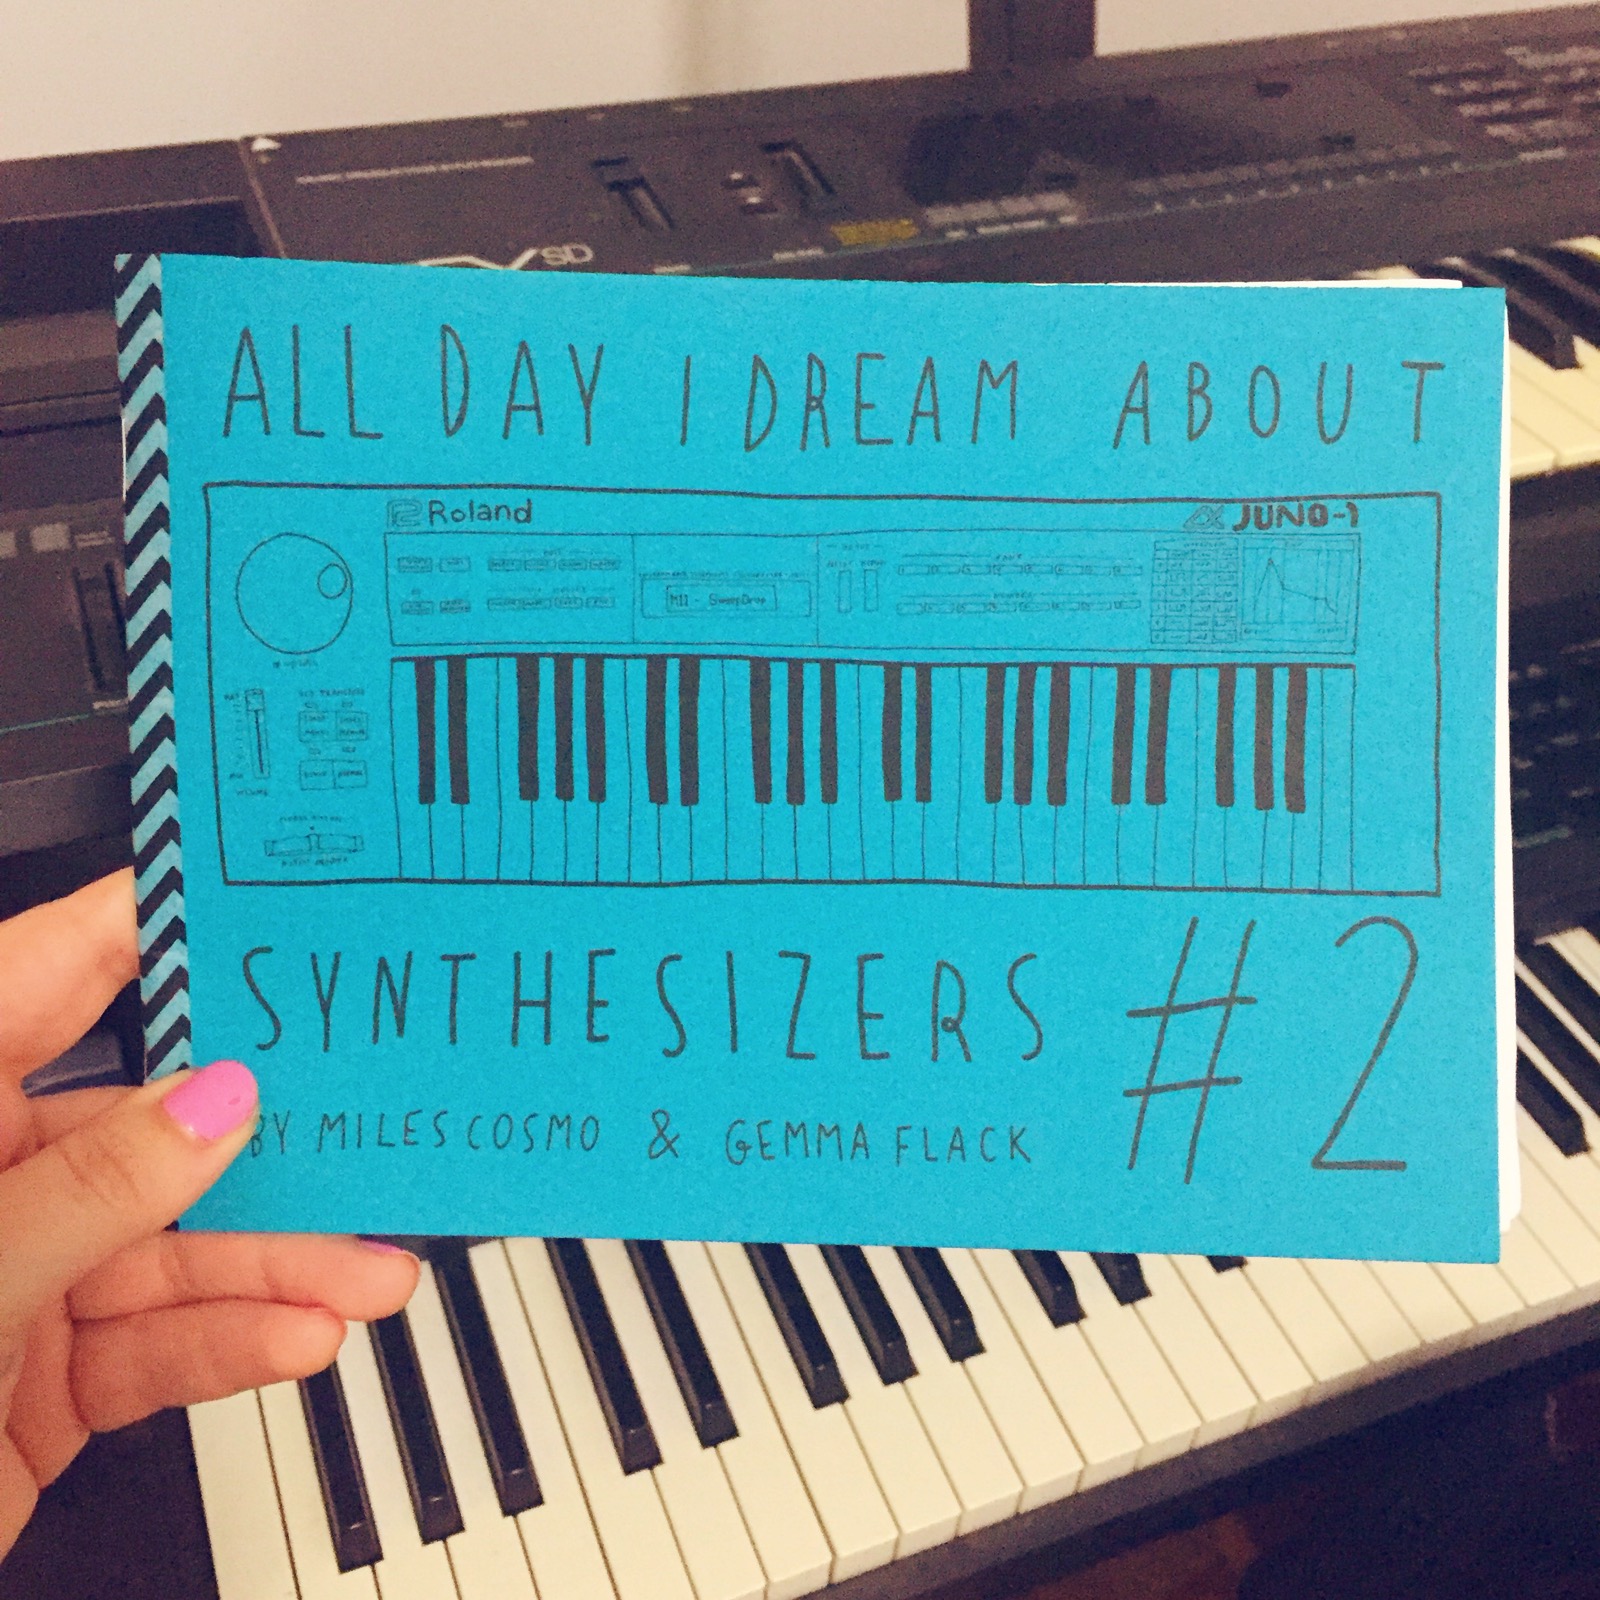 All Day I Dream About Synthesizers #2